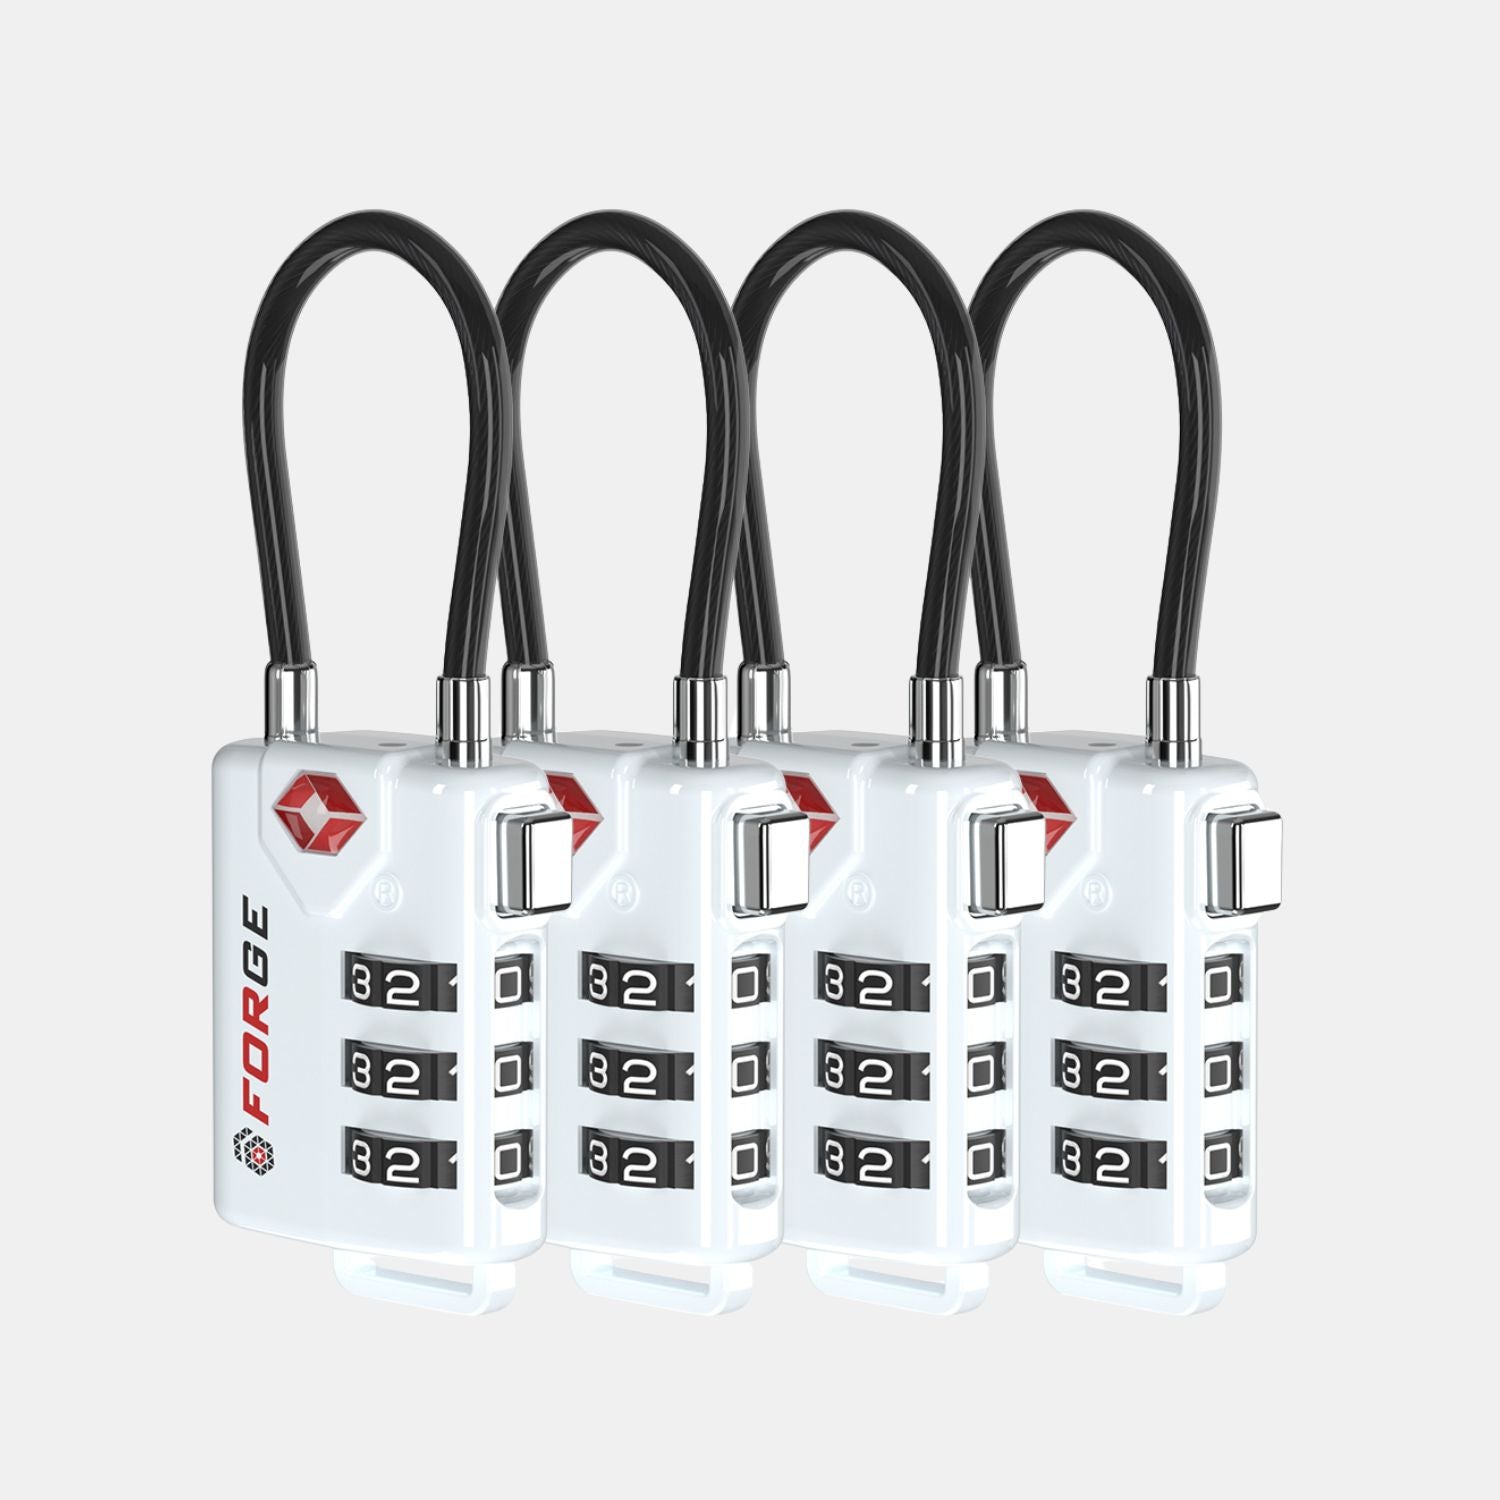 TSA Approved Cable Luggage Lock with Easy-to-Read Dials, White 4 Locks